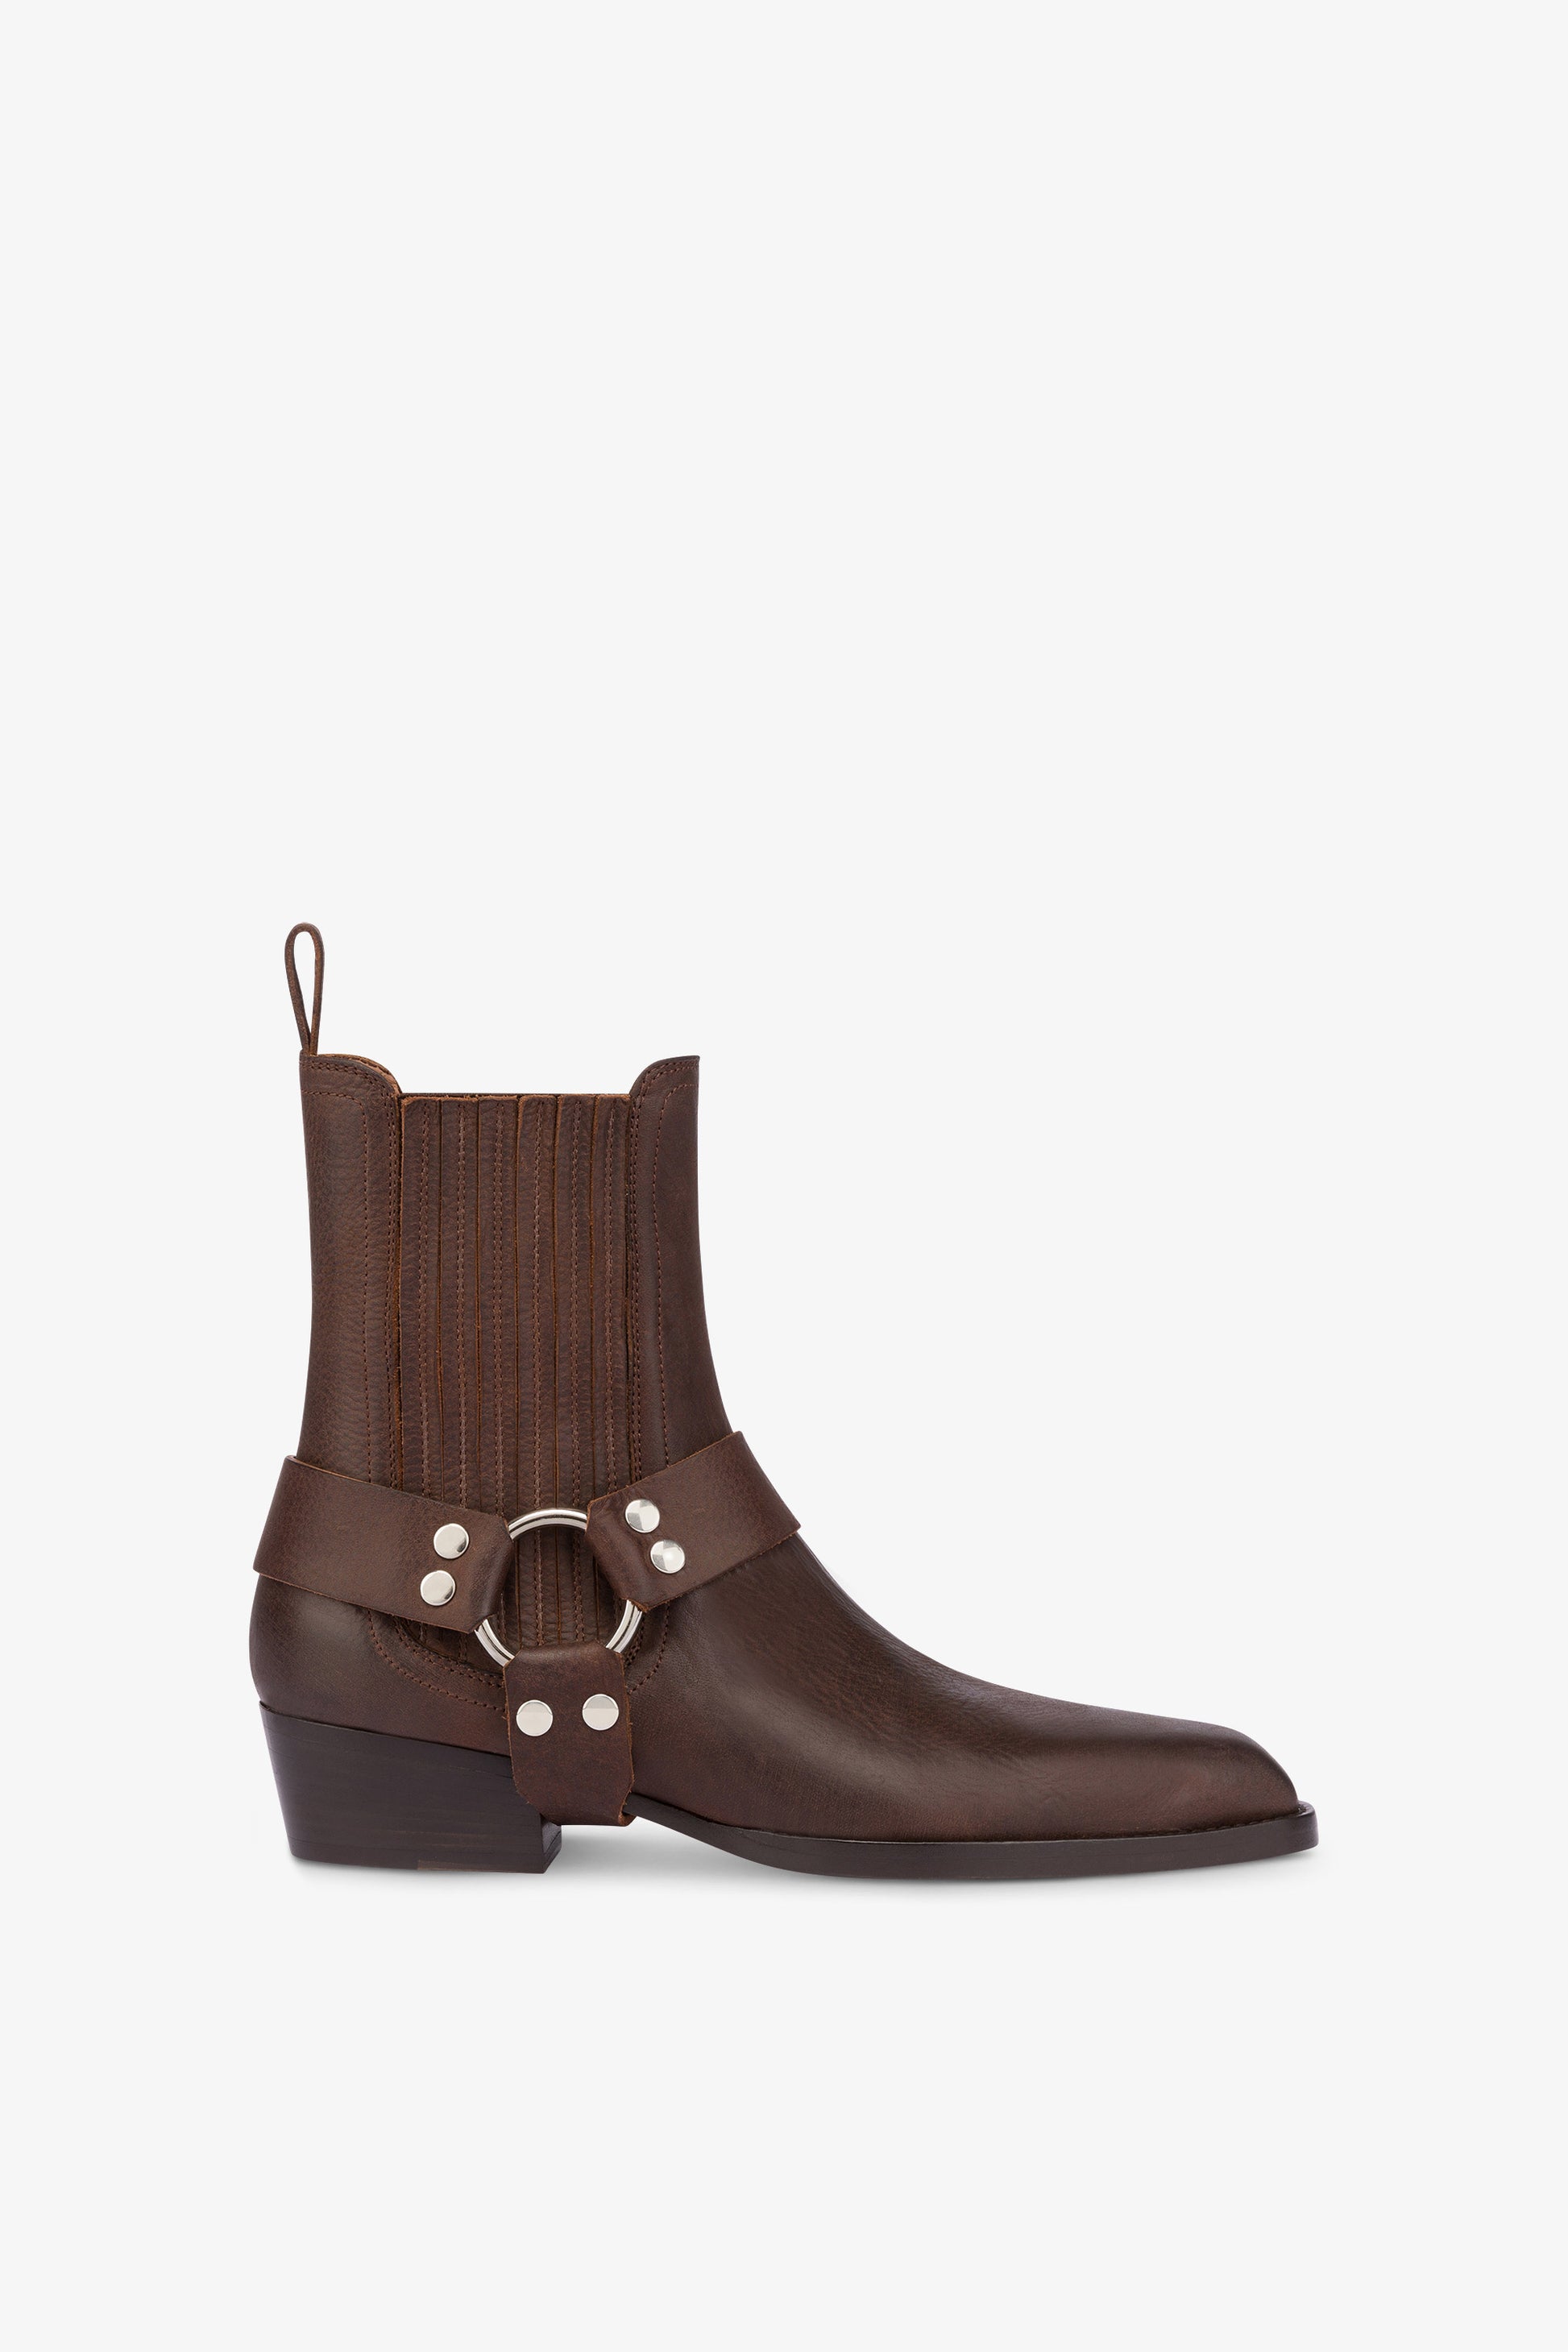 Rounded ankle boots in soft mulberry pebble leather